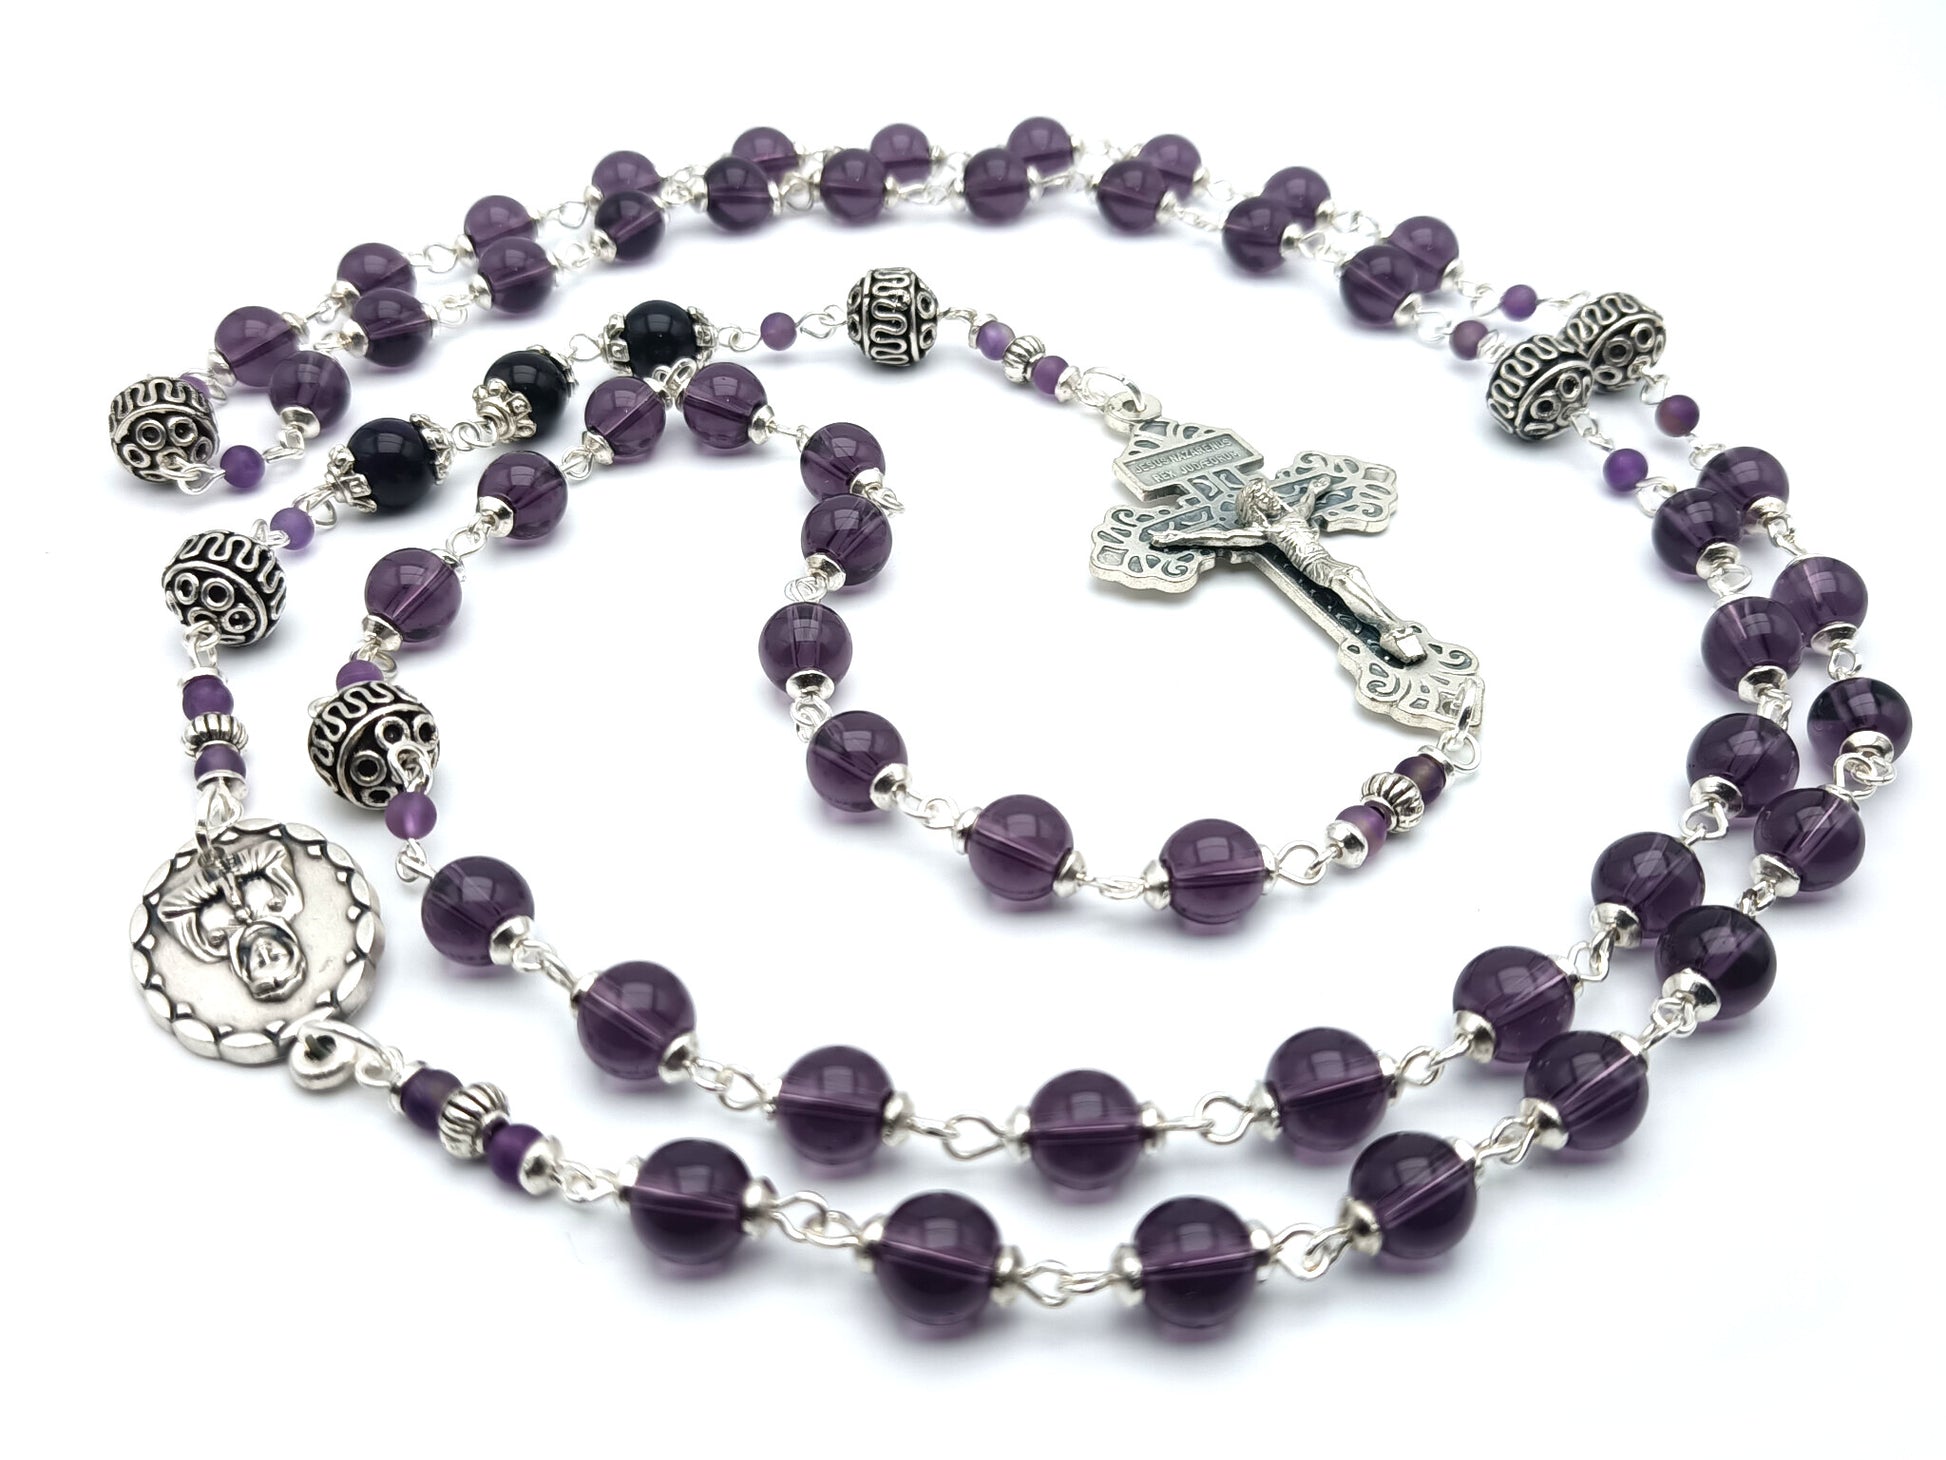 Rosa Mystica unique rosary beads circular rosary with amethyst and silver beads, Rosa Mystica centre medal and pardon crucifix.